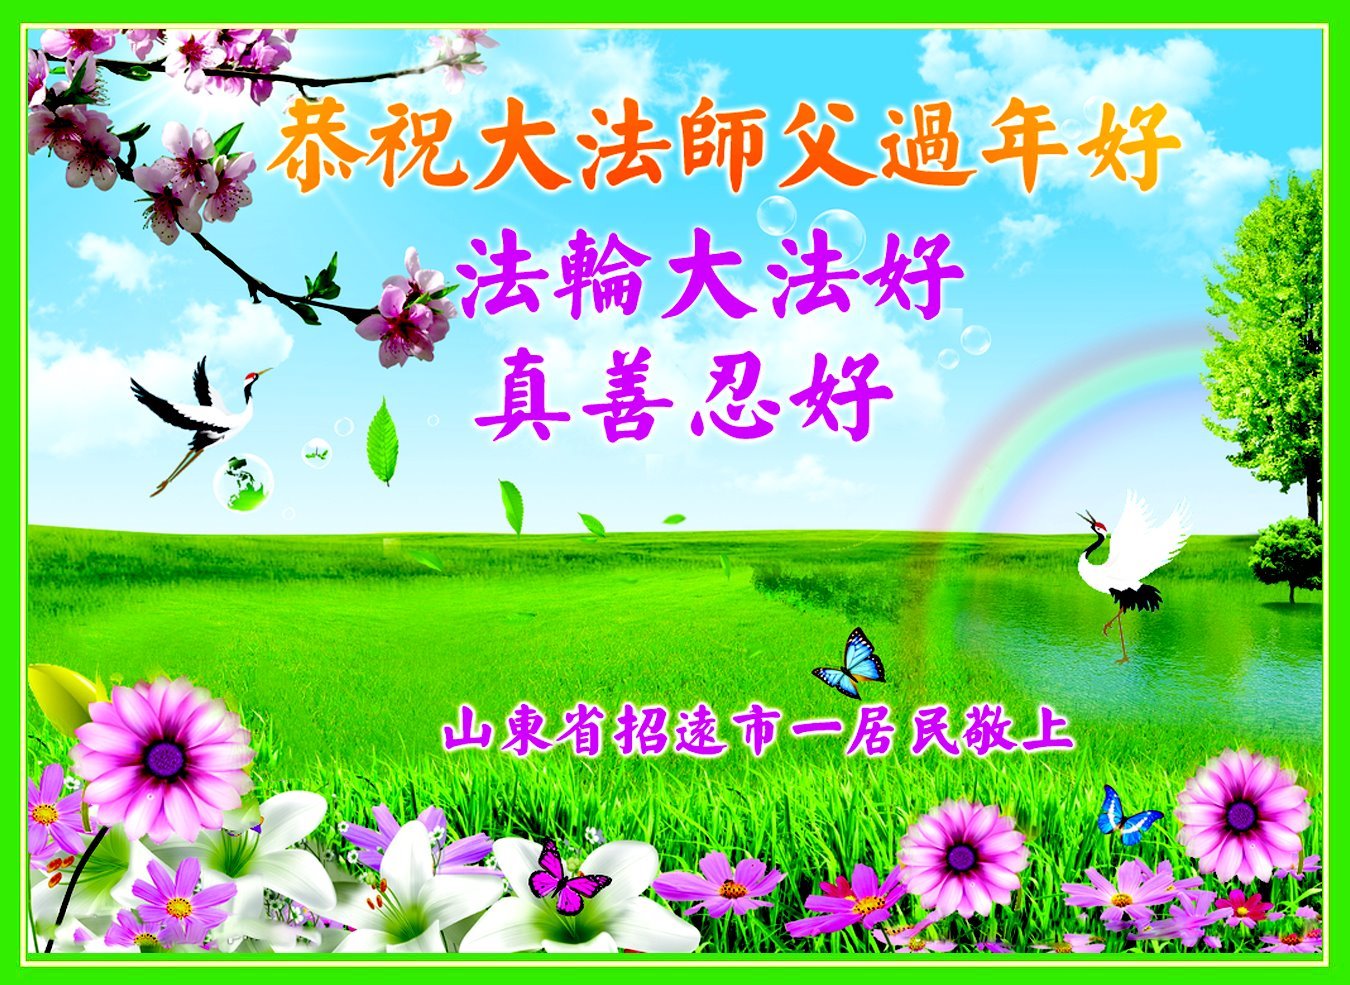 Image for article Supporters of Falun Dafa Wish Master Li Hongzhi a Happy Chinese New Year